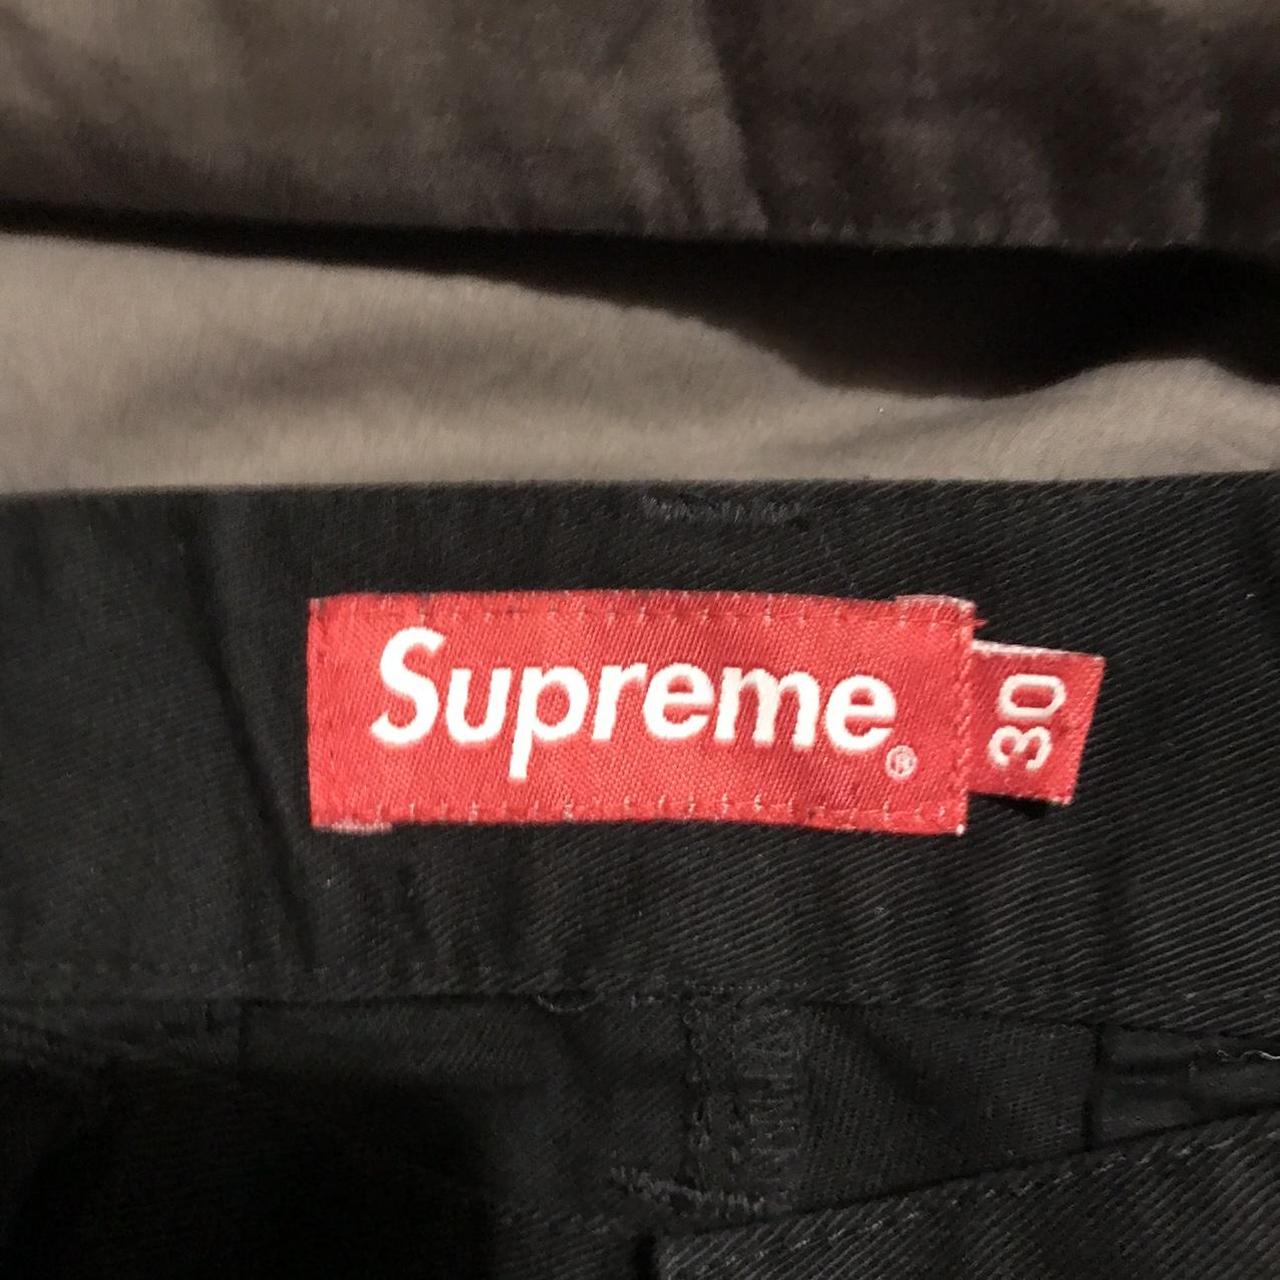 Supreme dragon work pants / trousers /bottoms, In...